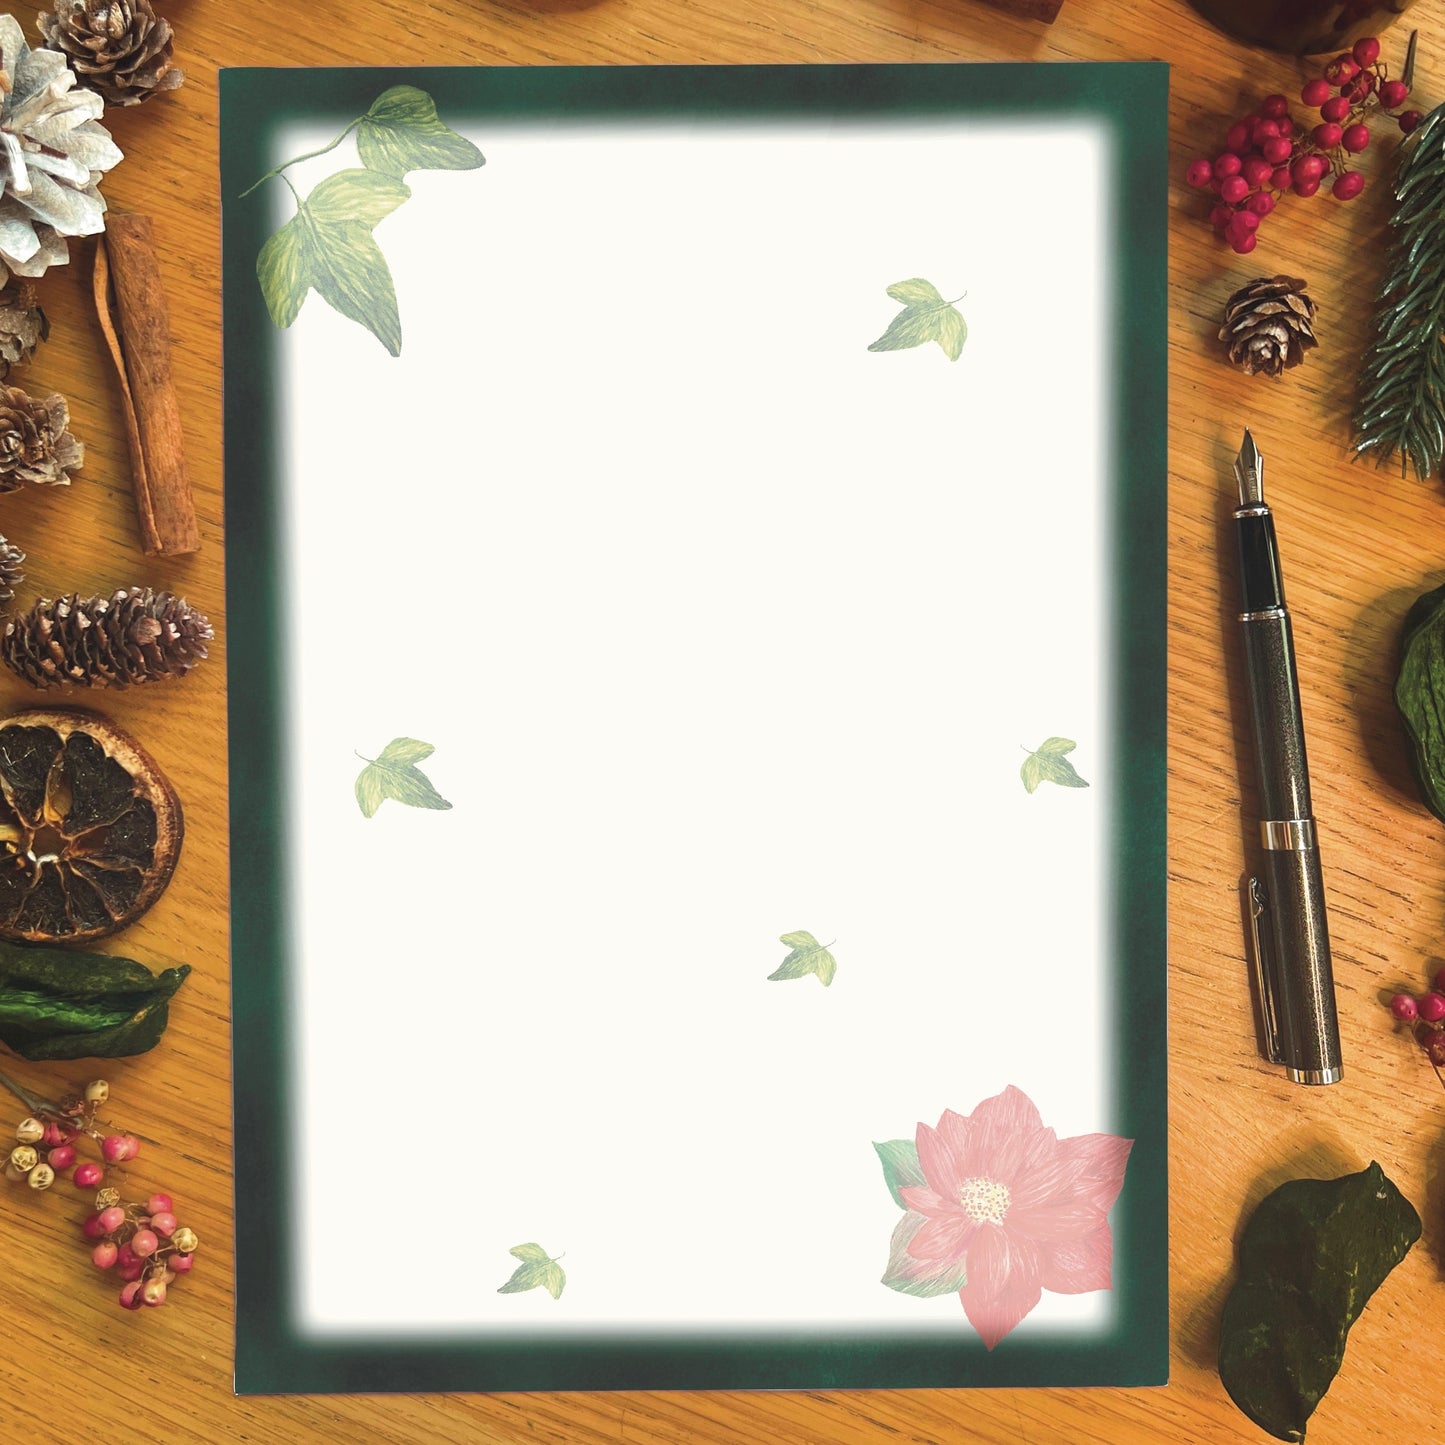 Winters bloom letter writing page.  Red poinsettia and ivy illustrated page with dark green border